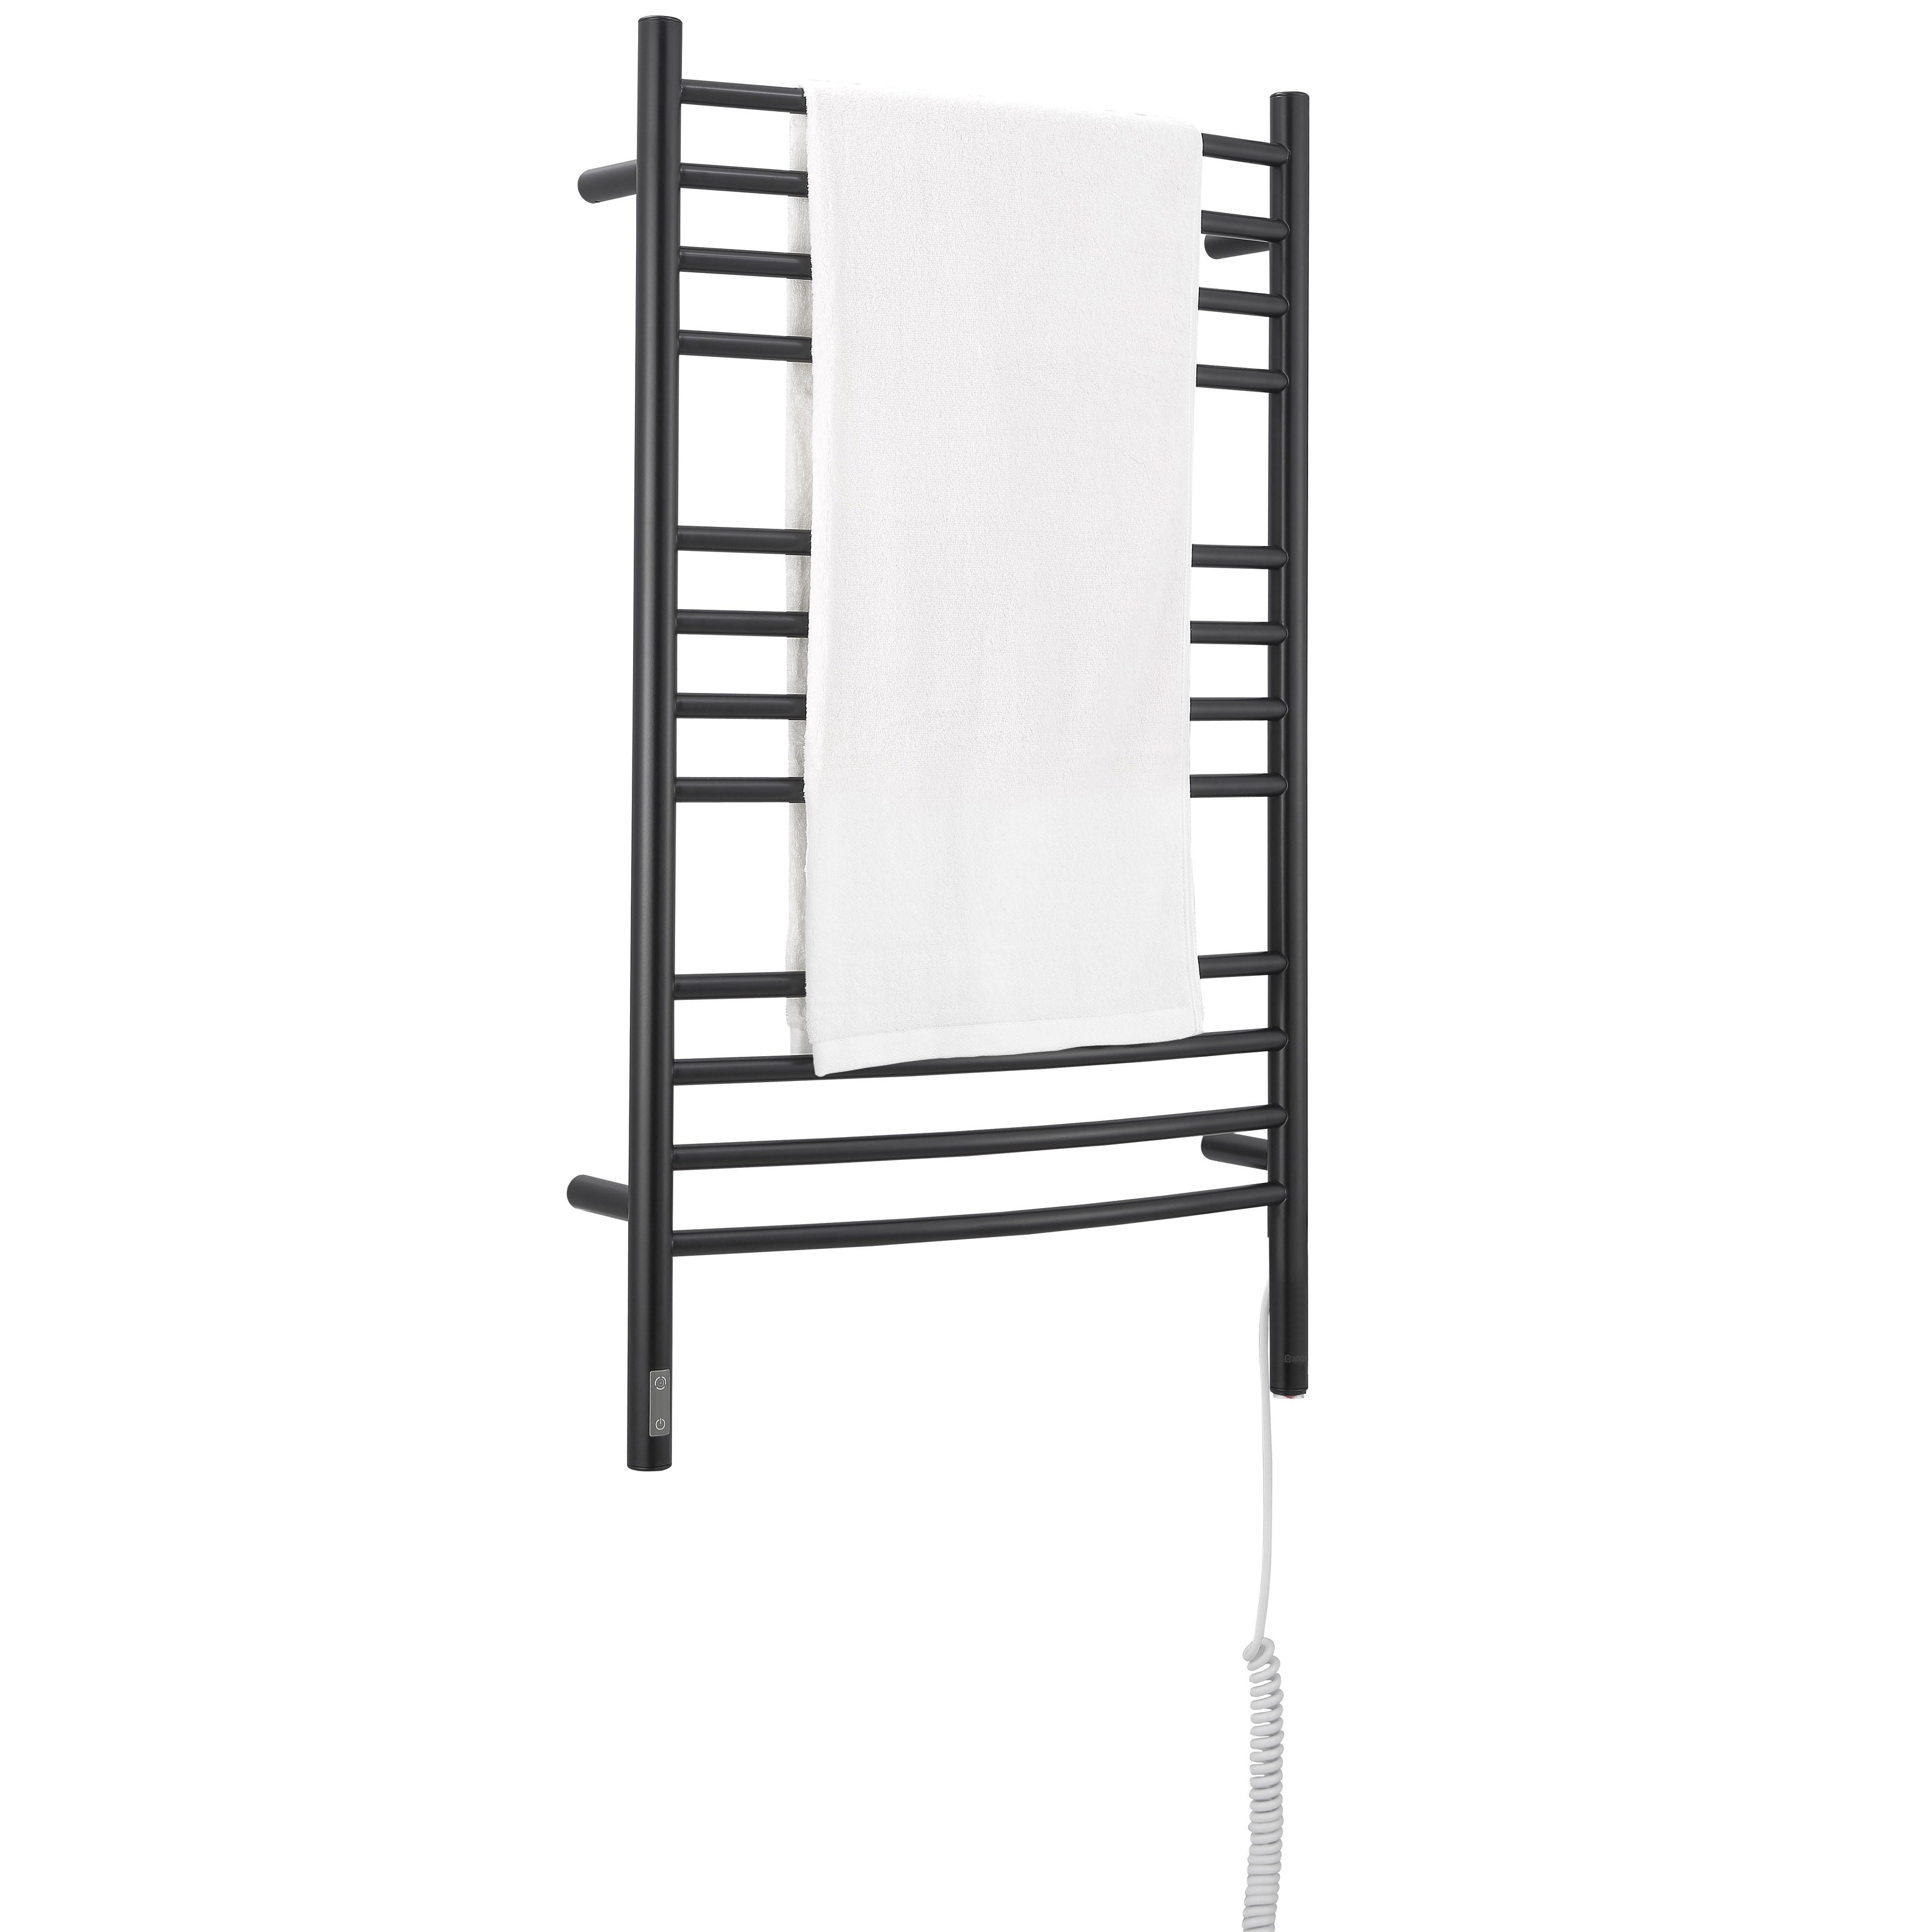 Lustra OBT 12 Bar Dual Wall Mount Towel Warmer with Integrated On-Board Timer in Matte Black